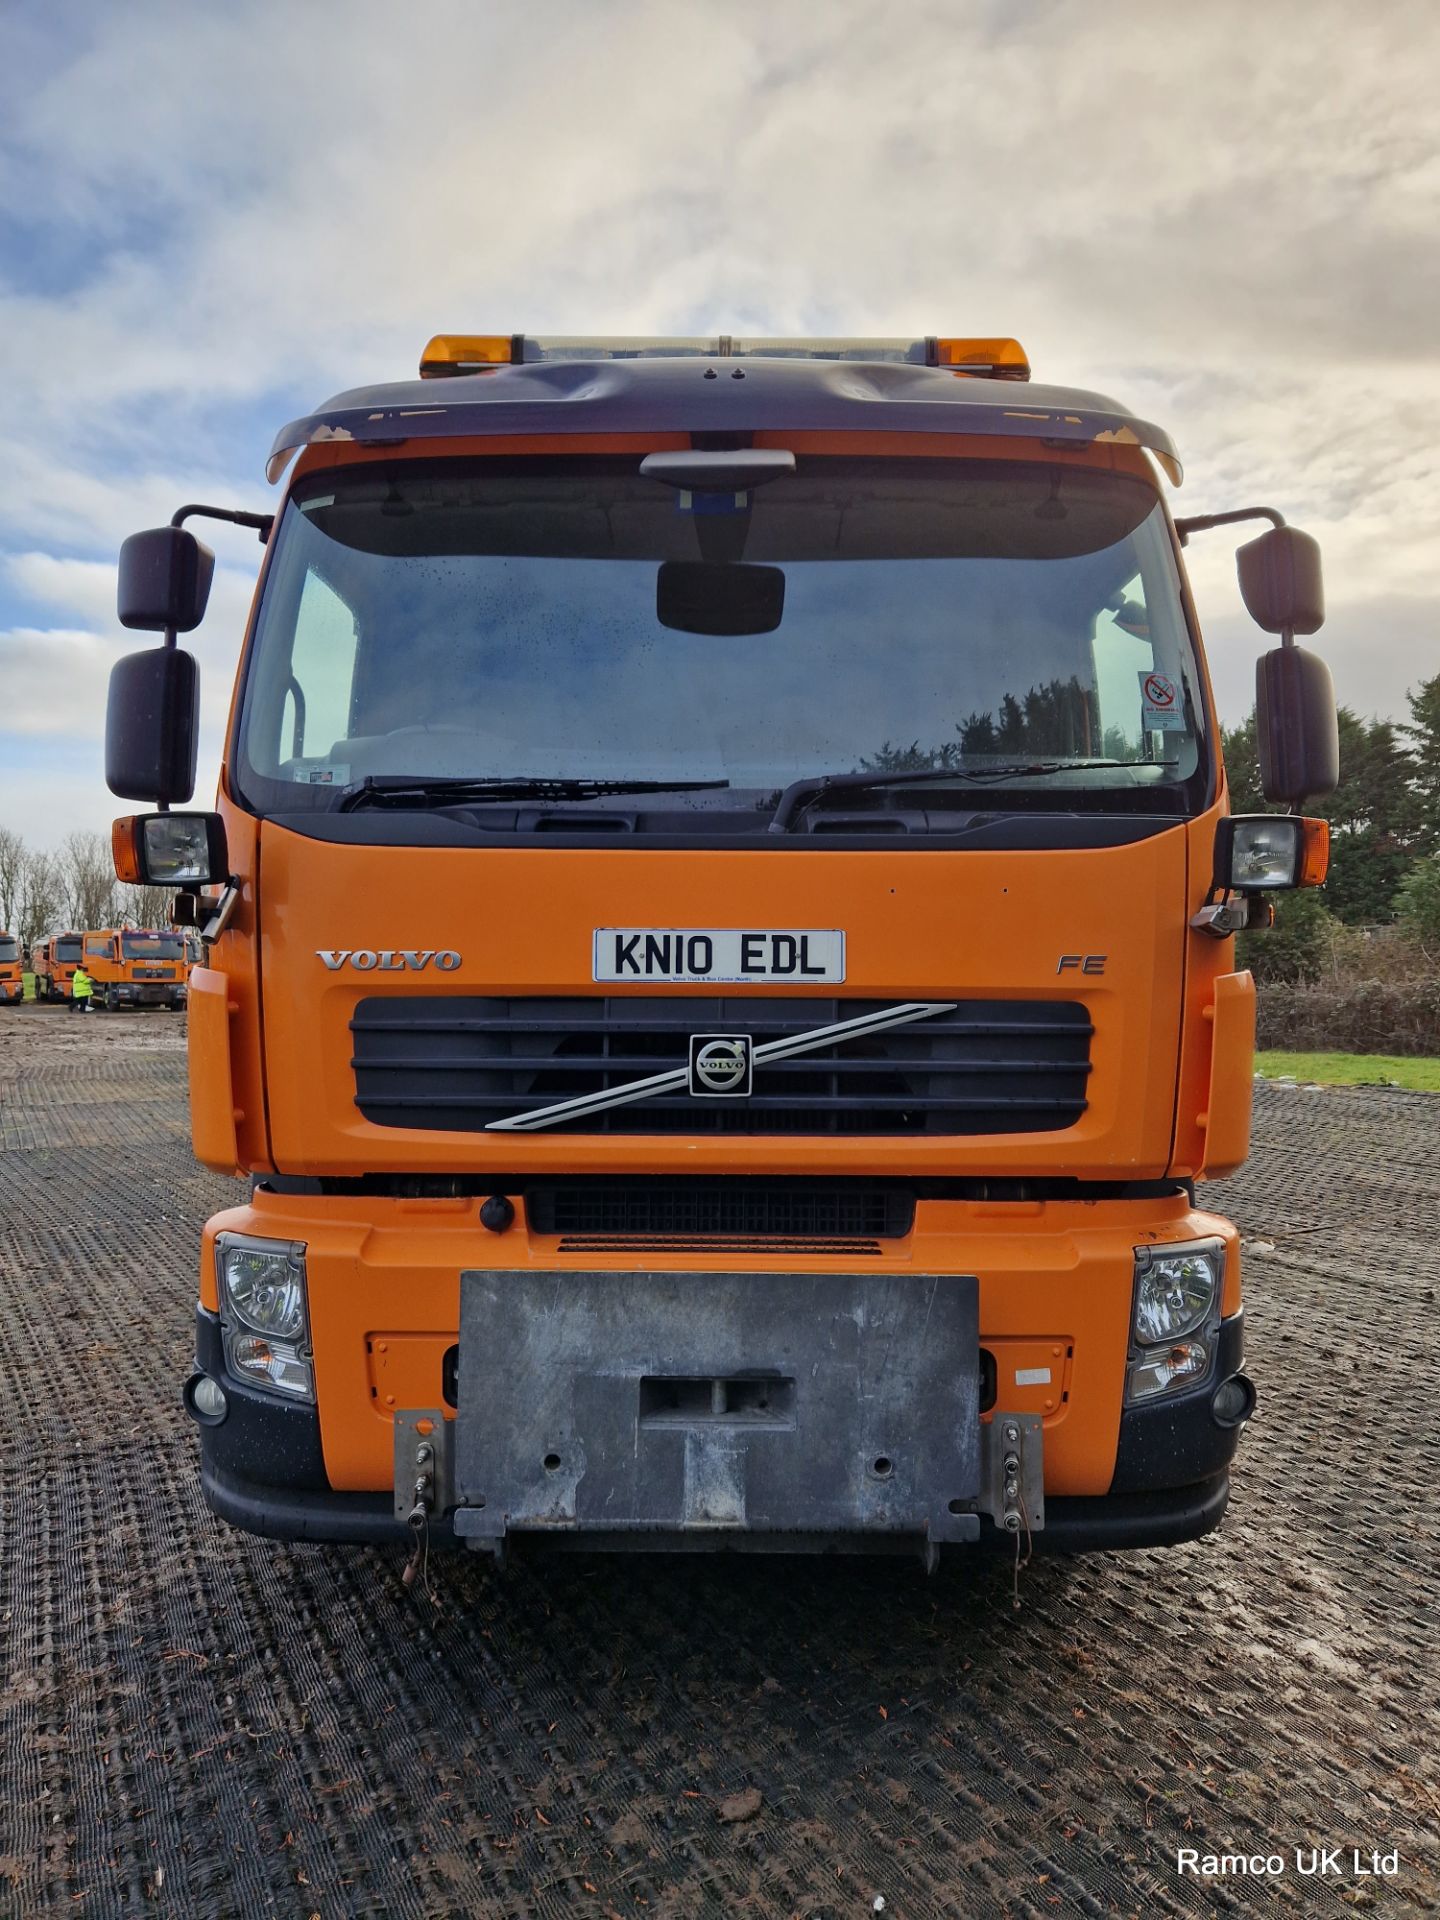 2010 (reg KN10 EDL) Volvo FE 340 6x4 with Romaquip wet gritter mount. - Image 12 of 20